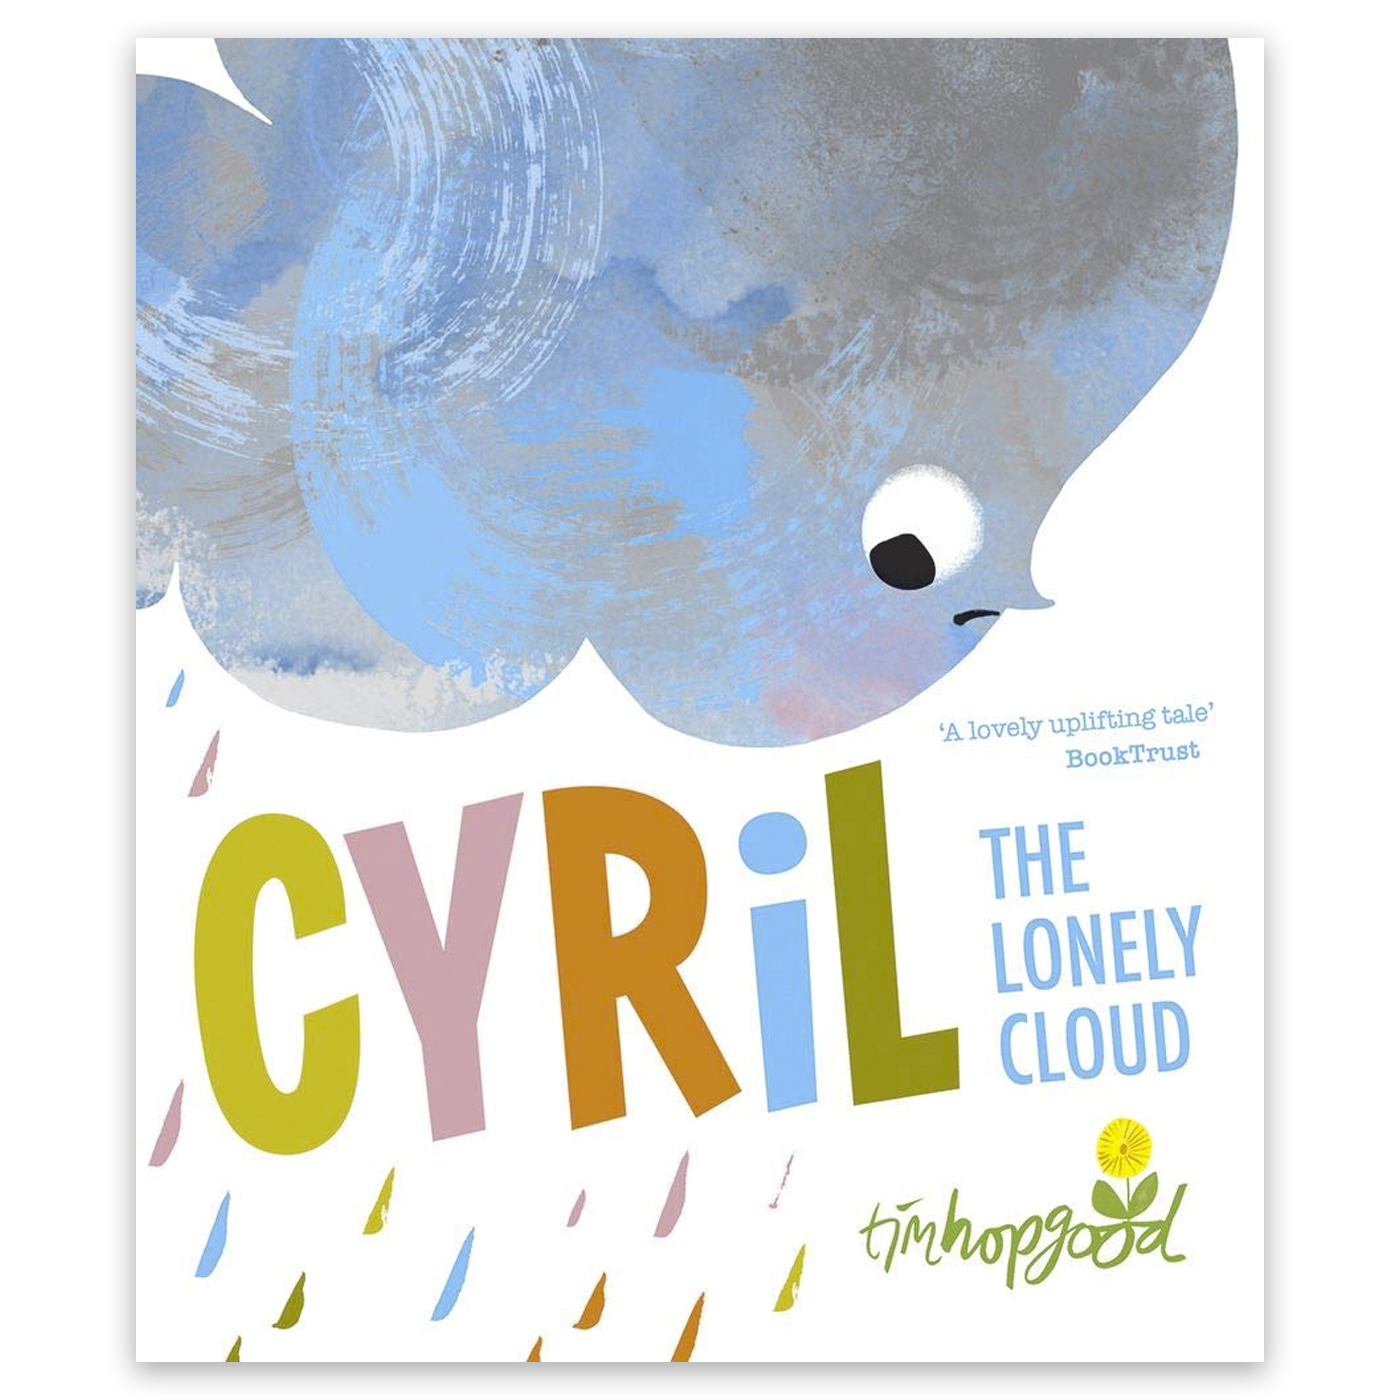 OXFORD CHILDRENS BOOK Cyril The Lonely Cloud